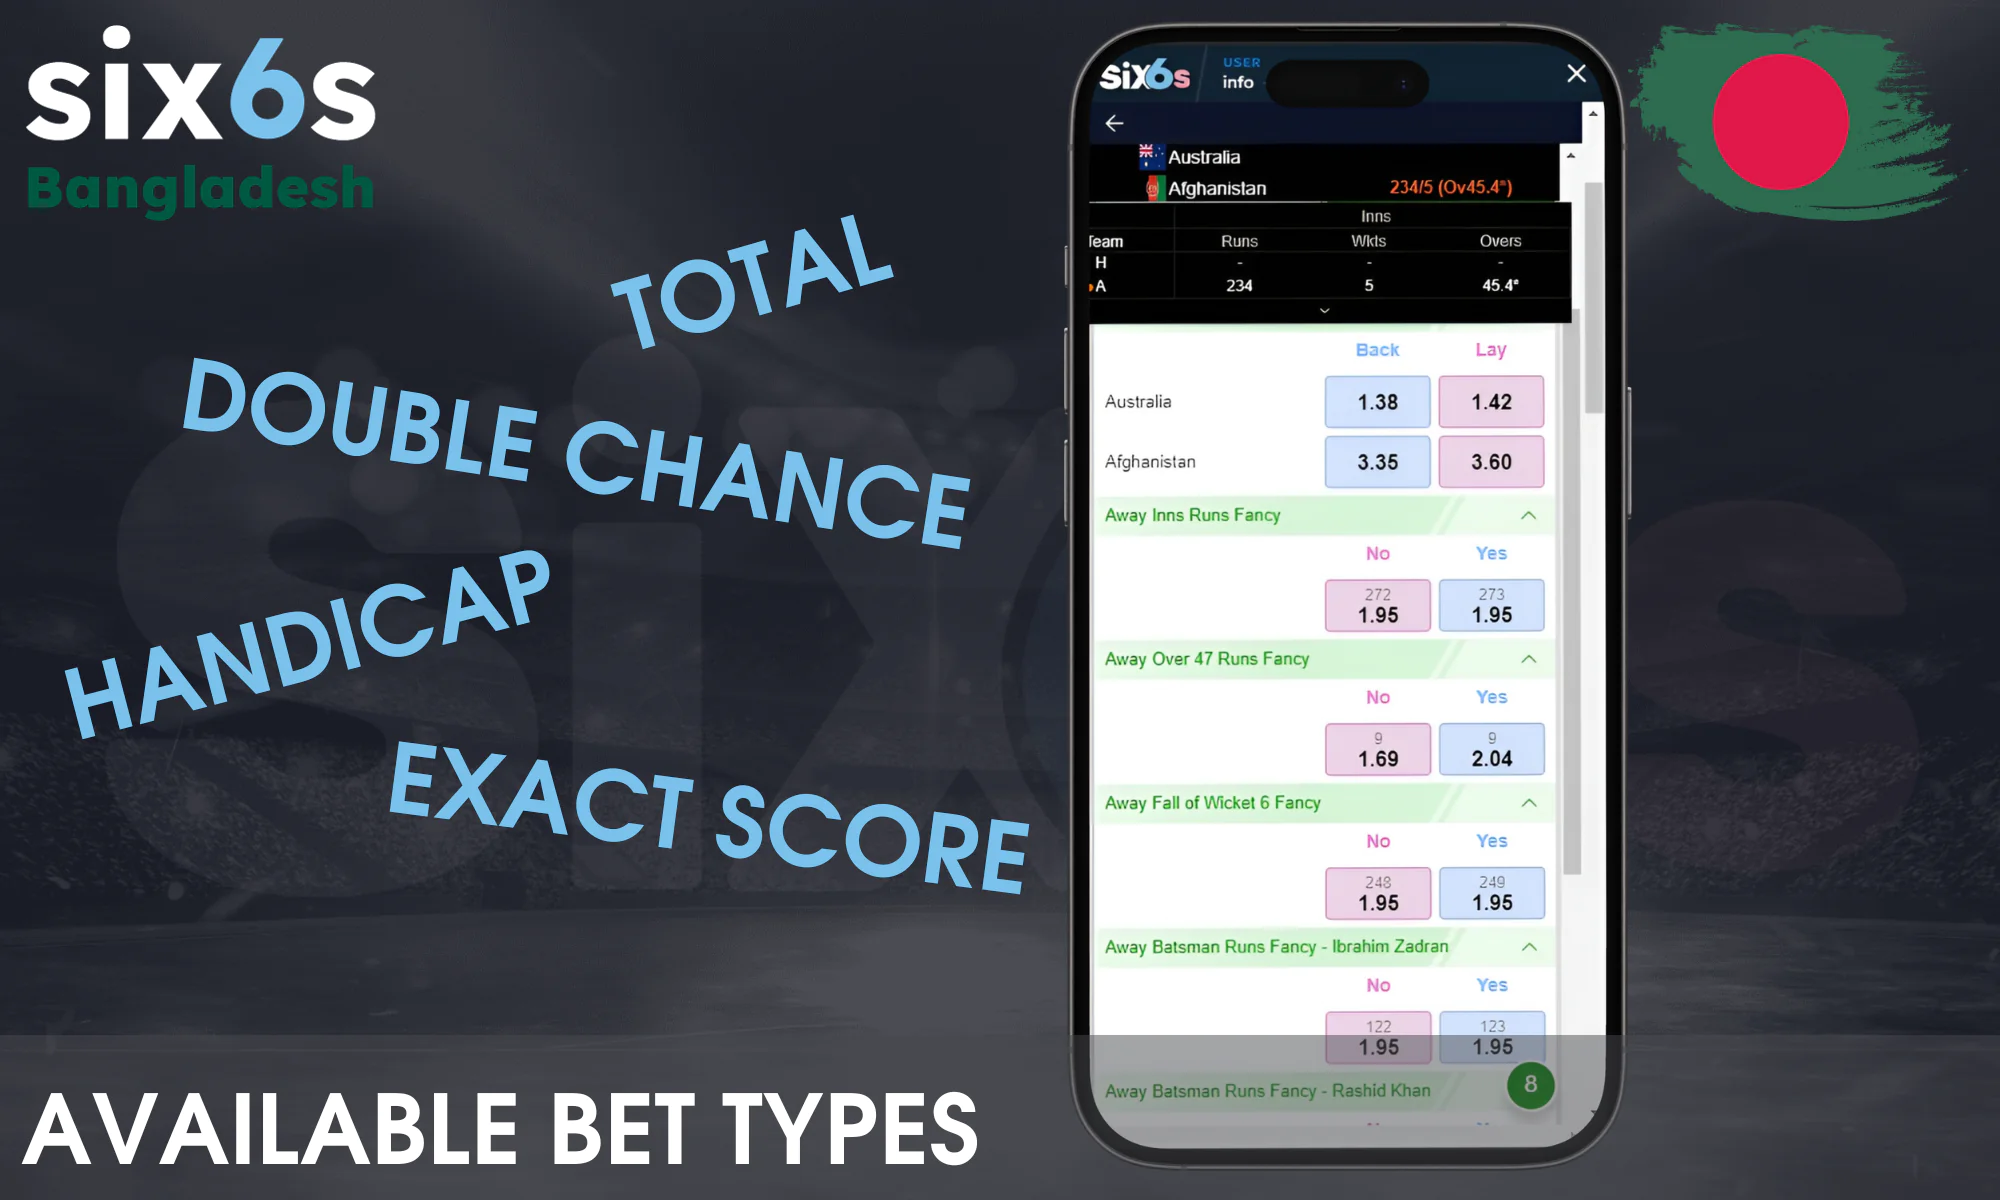 Types of sports betting available at Six6s